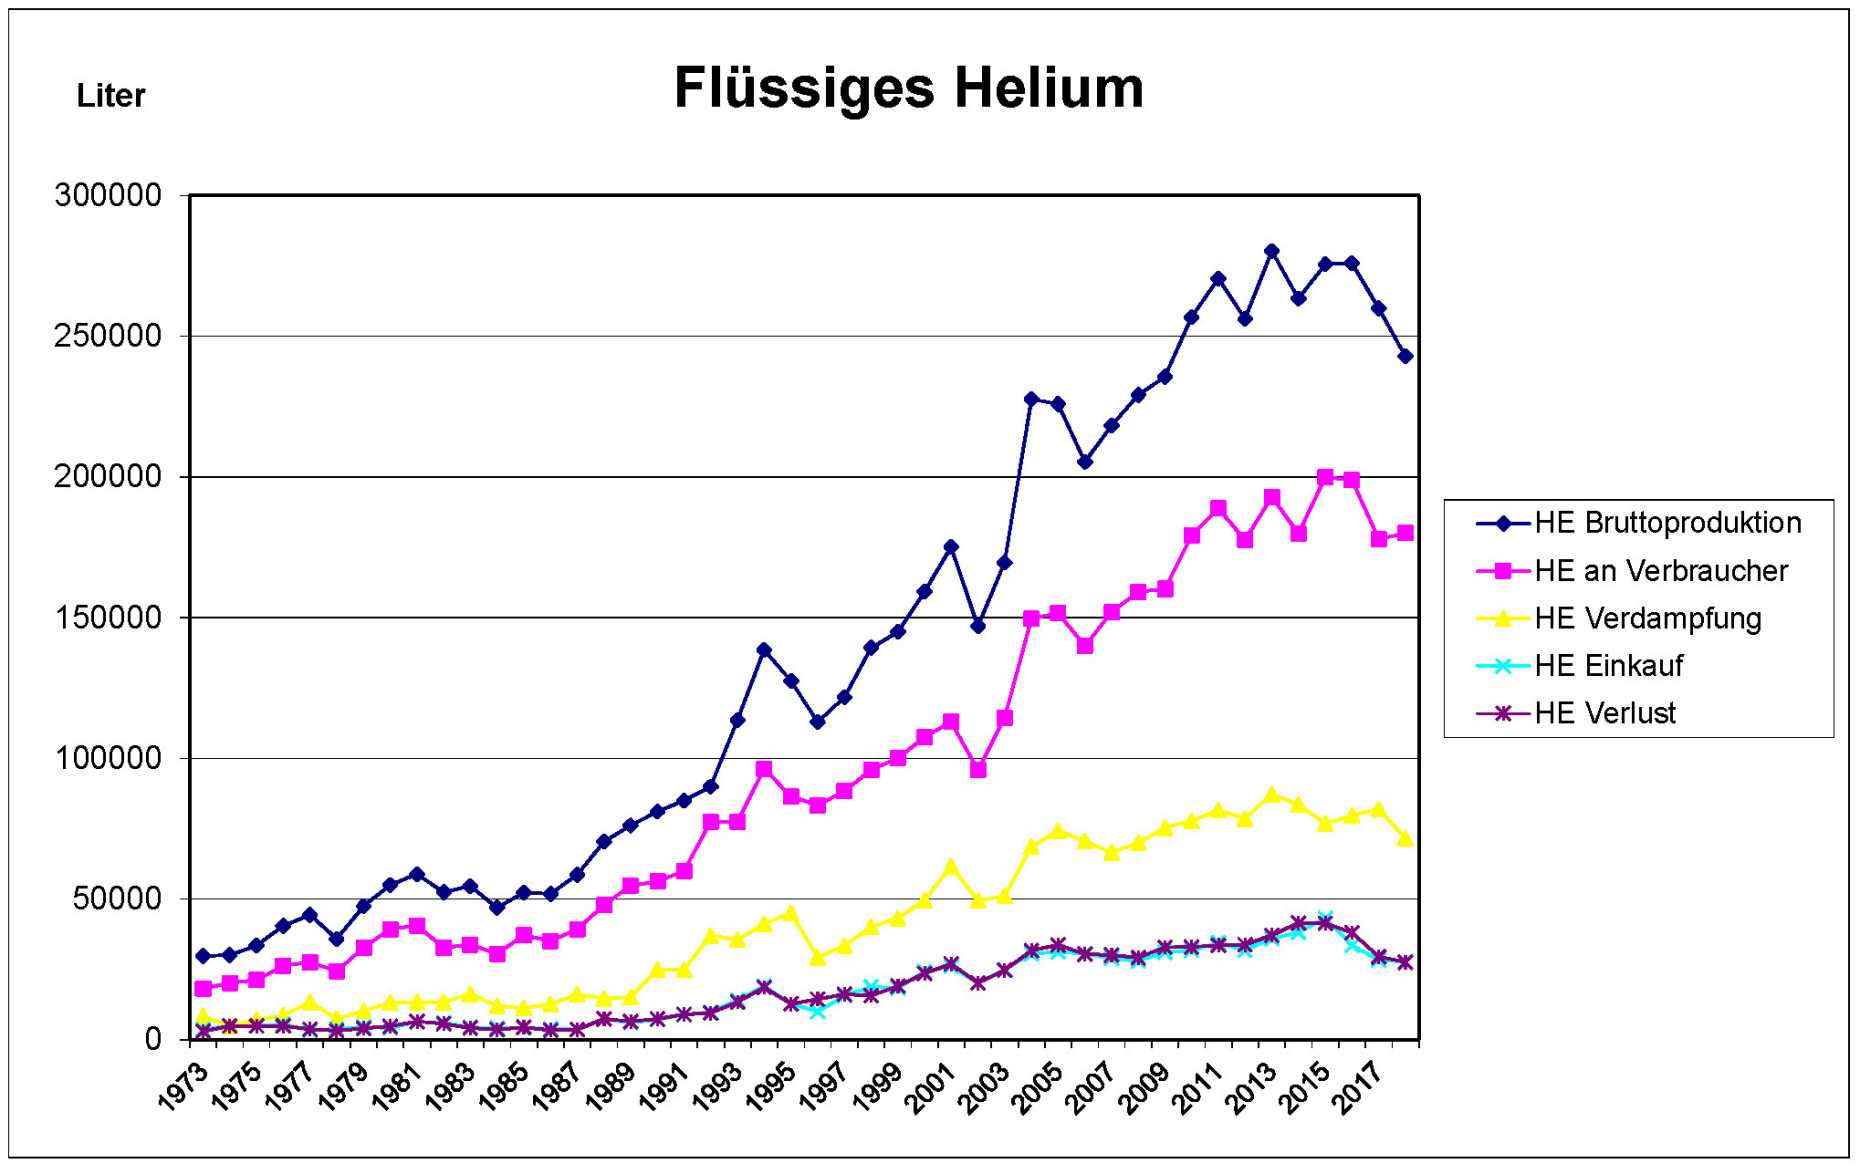 Management of liquid helium from 1973 to 2017 in litres by the Department of Physics of ETH Zurich. Graphic: ETH Zurich, René Keller